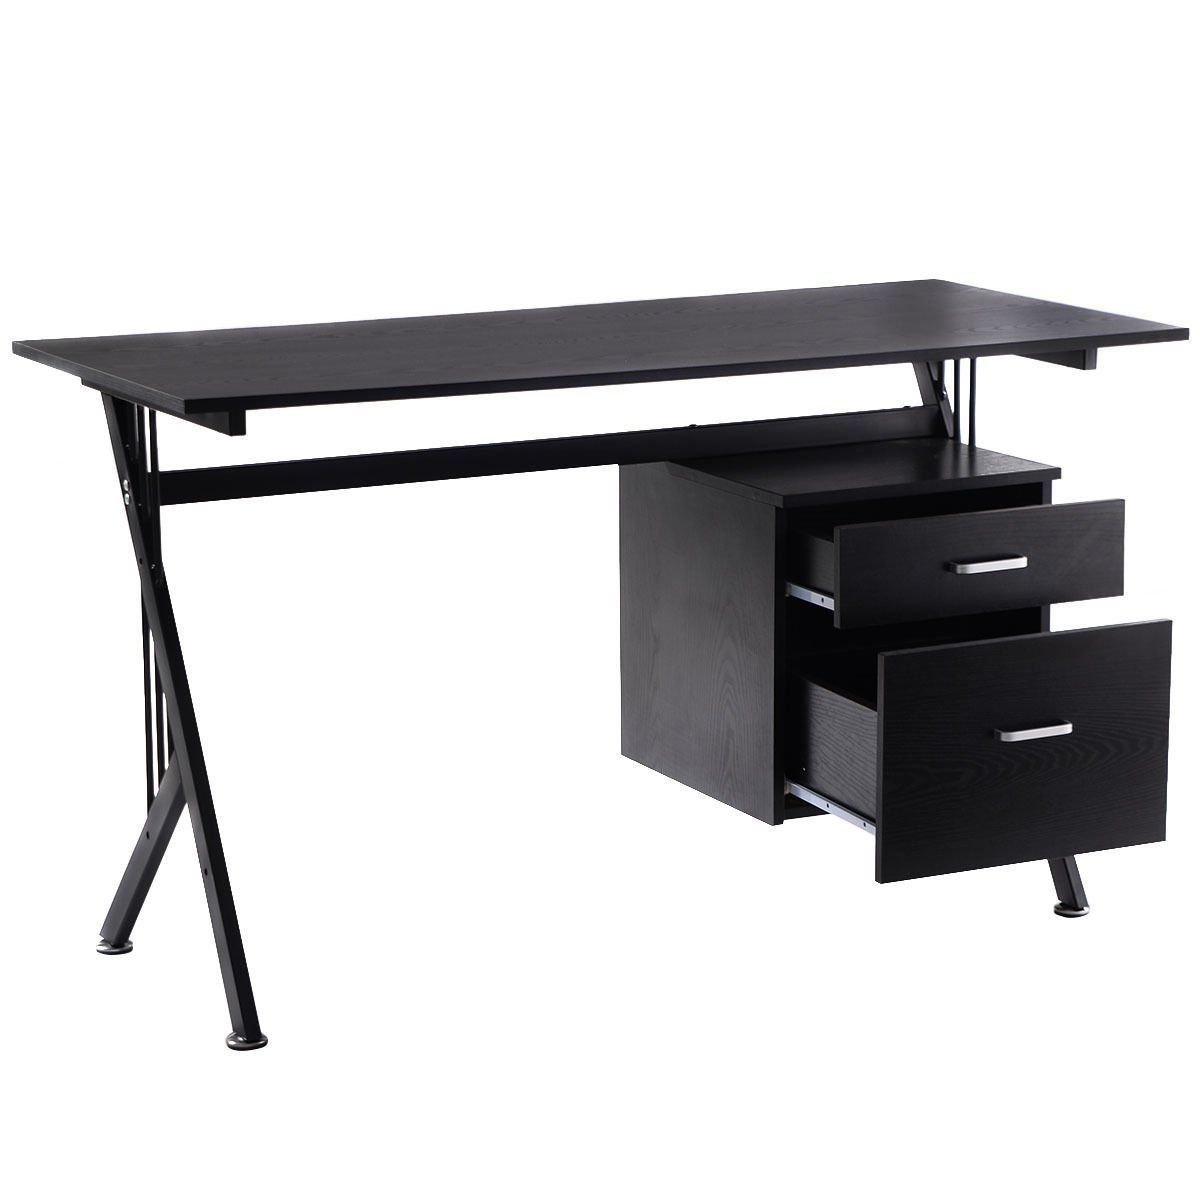 Black Wood Writing Desks For Paper And Pen Enthusiast Regarding Natural And Black Wood Writing Desks (View 7 of 15)